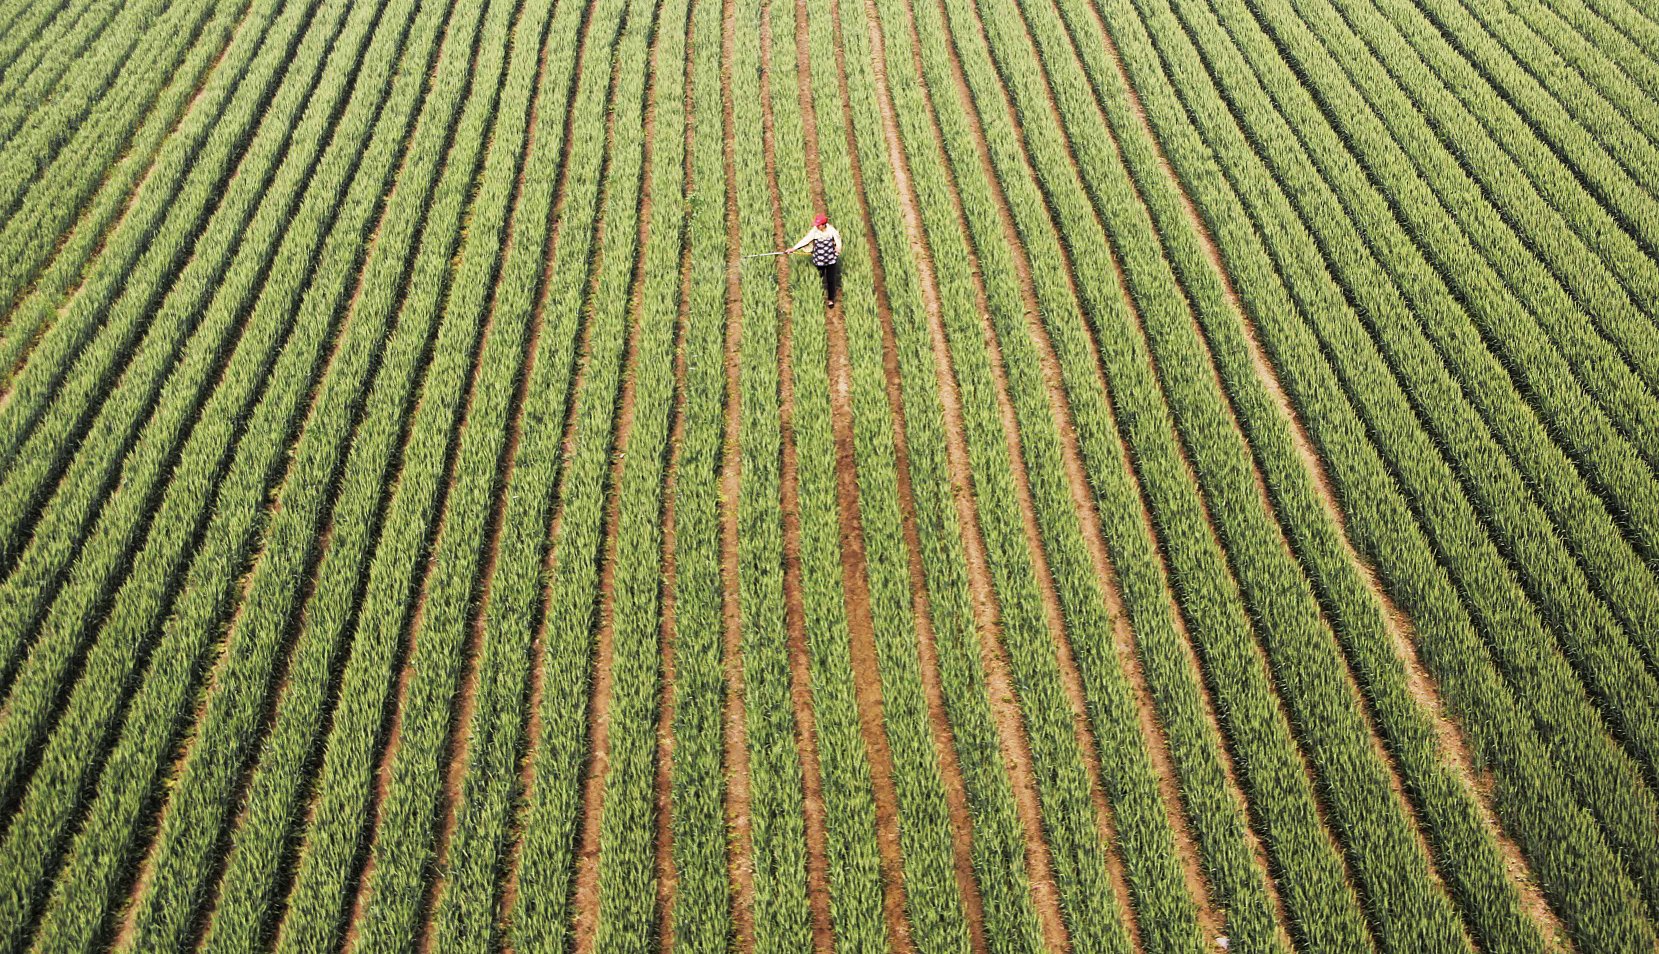 Sinofert said the outlook for the fertiliser sector is clouded by slowing demand growth and a supply glut. Photo: Xinhua